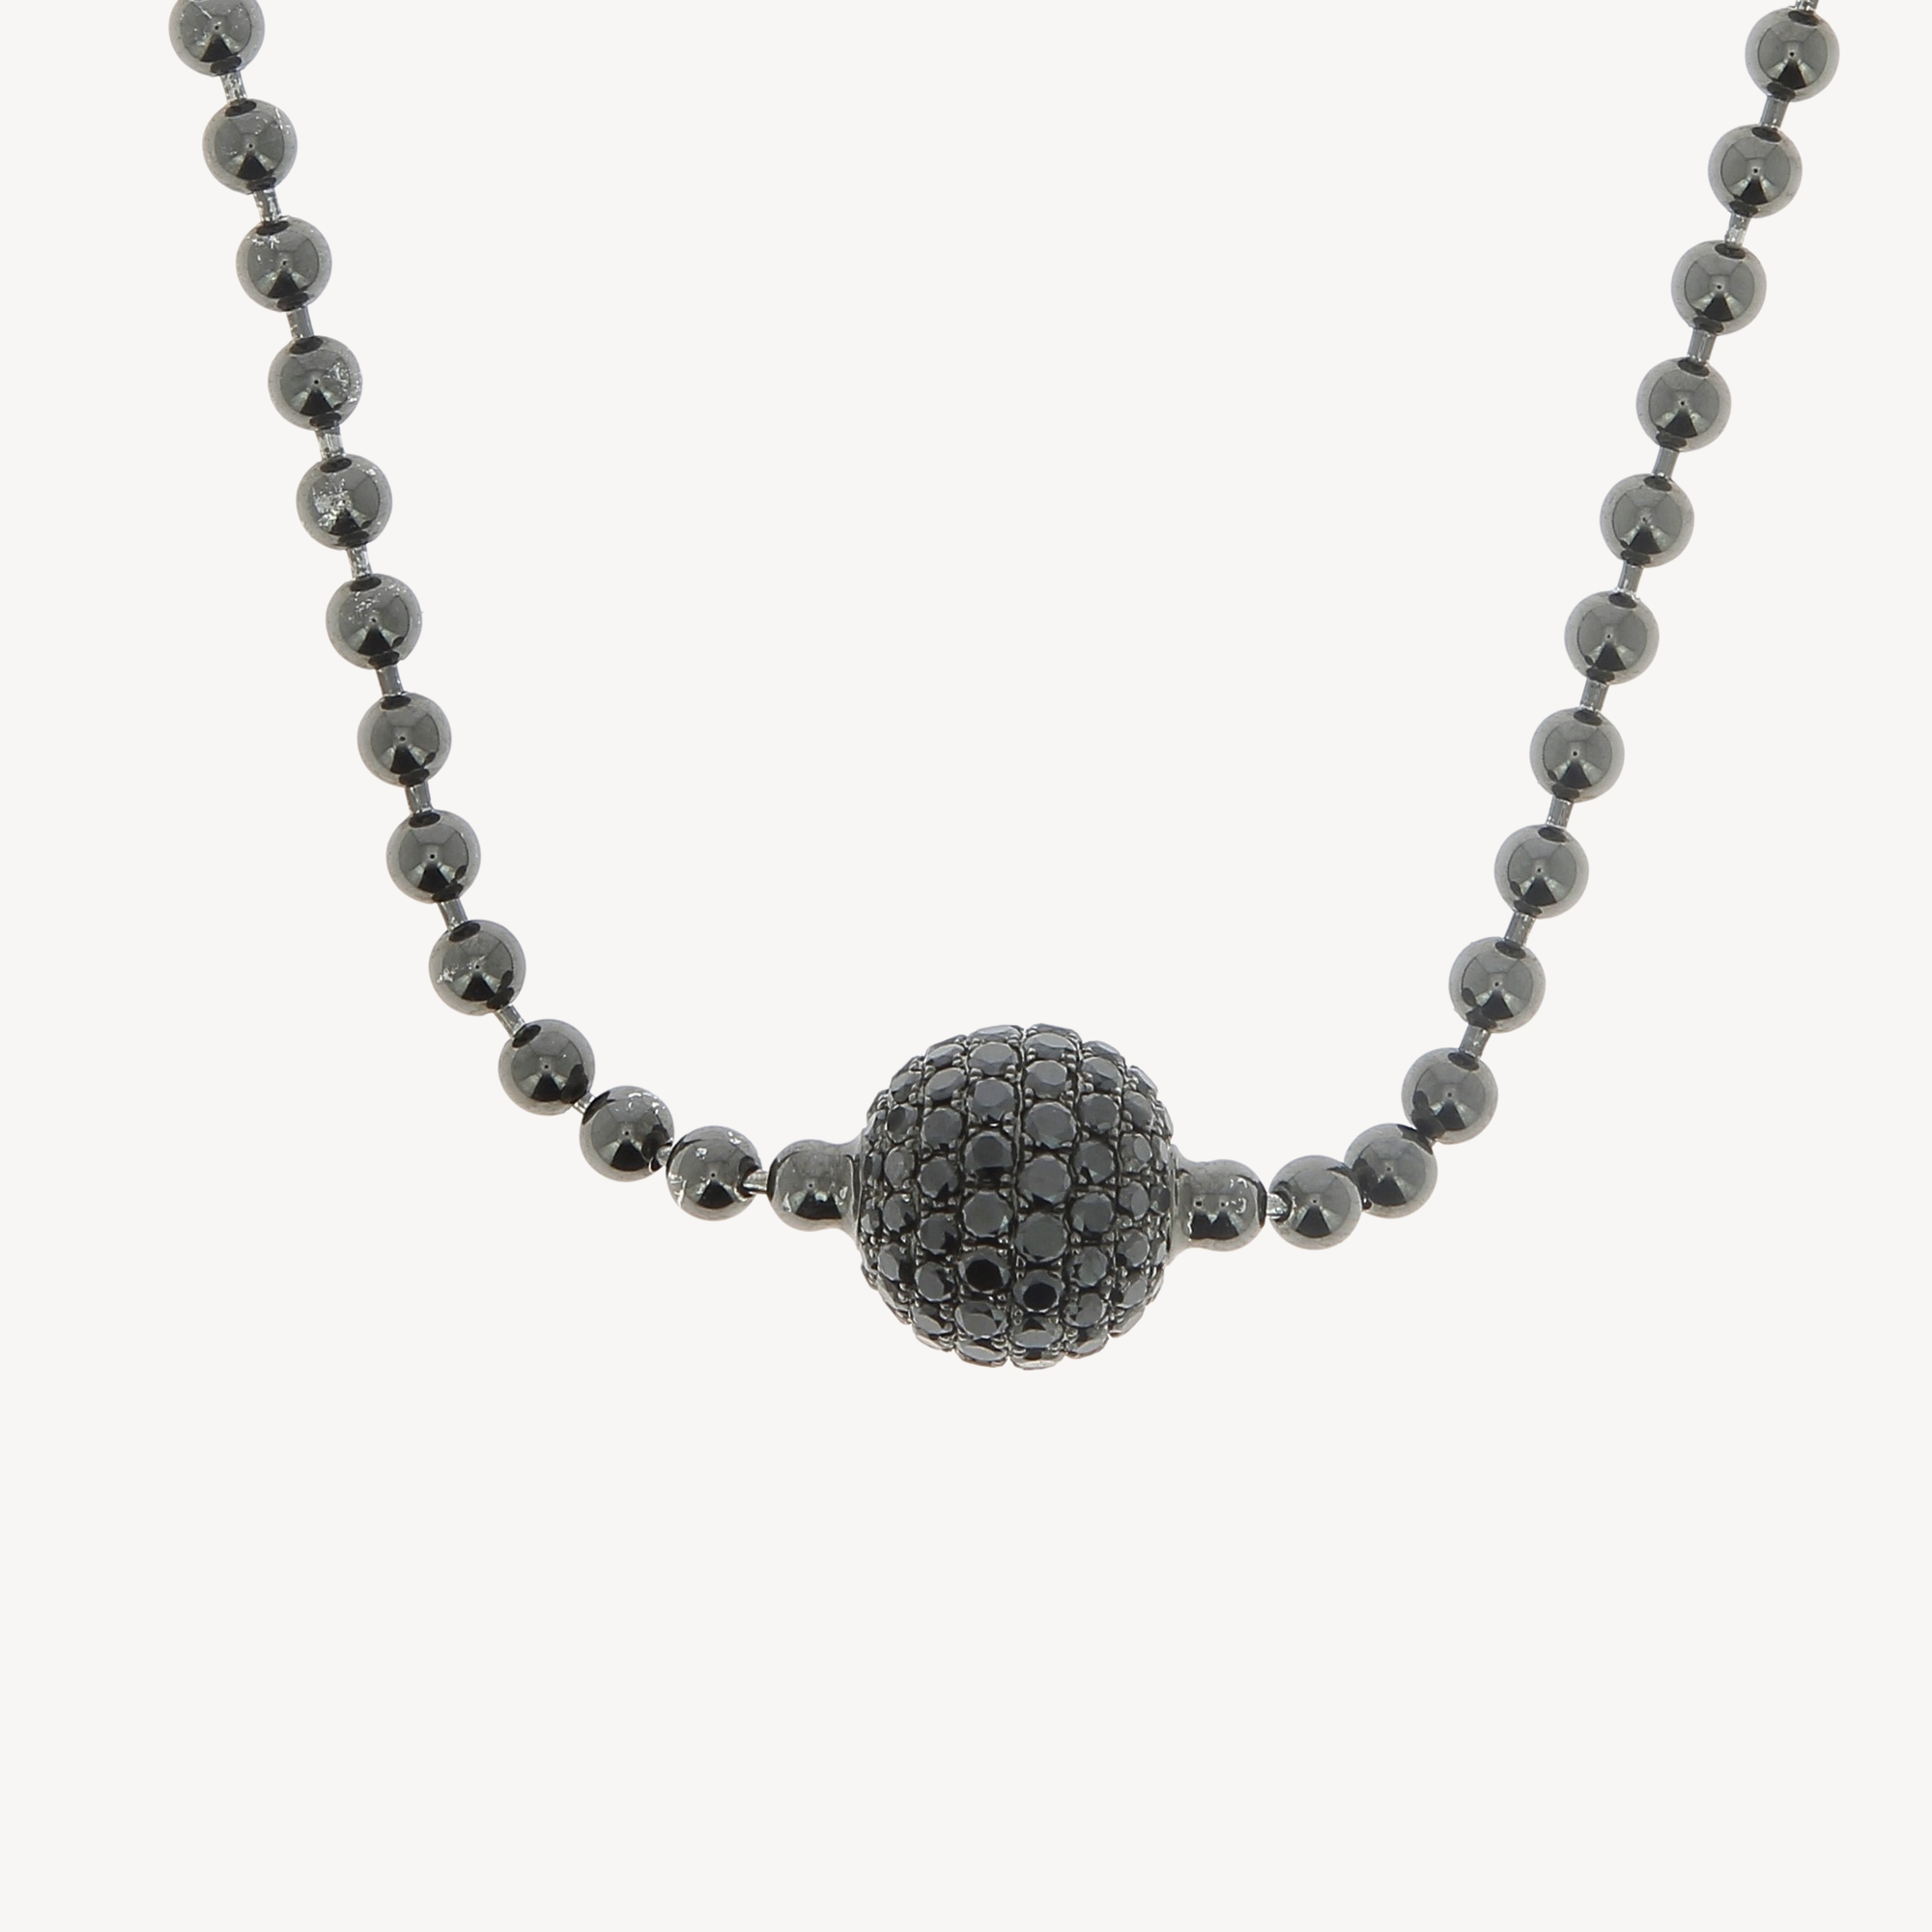 Bubble chain necklace with 1 bead black diamond pave